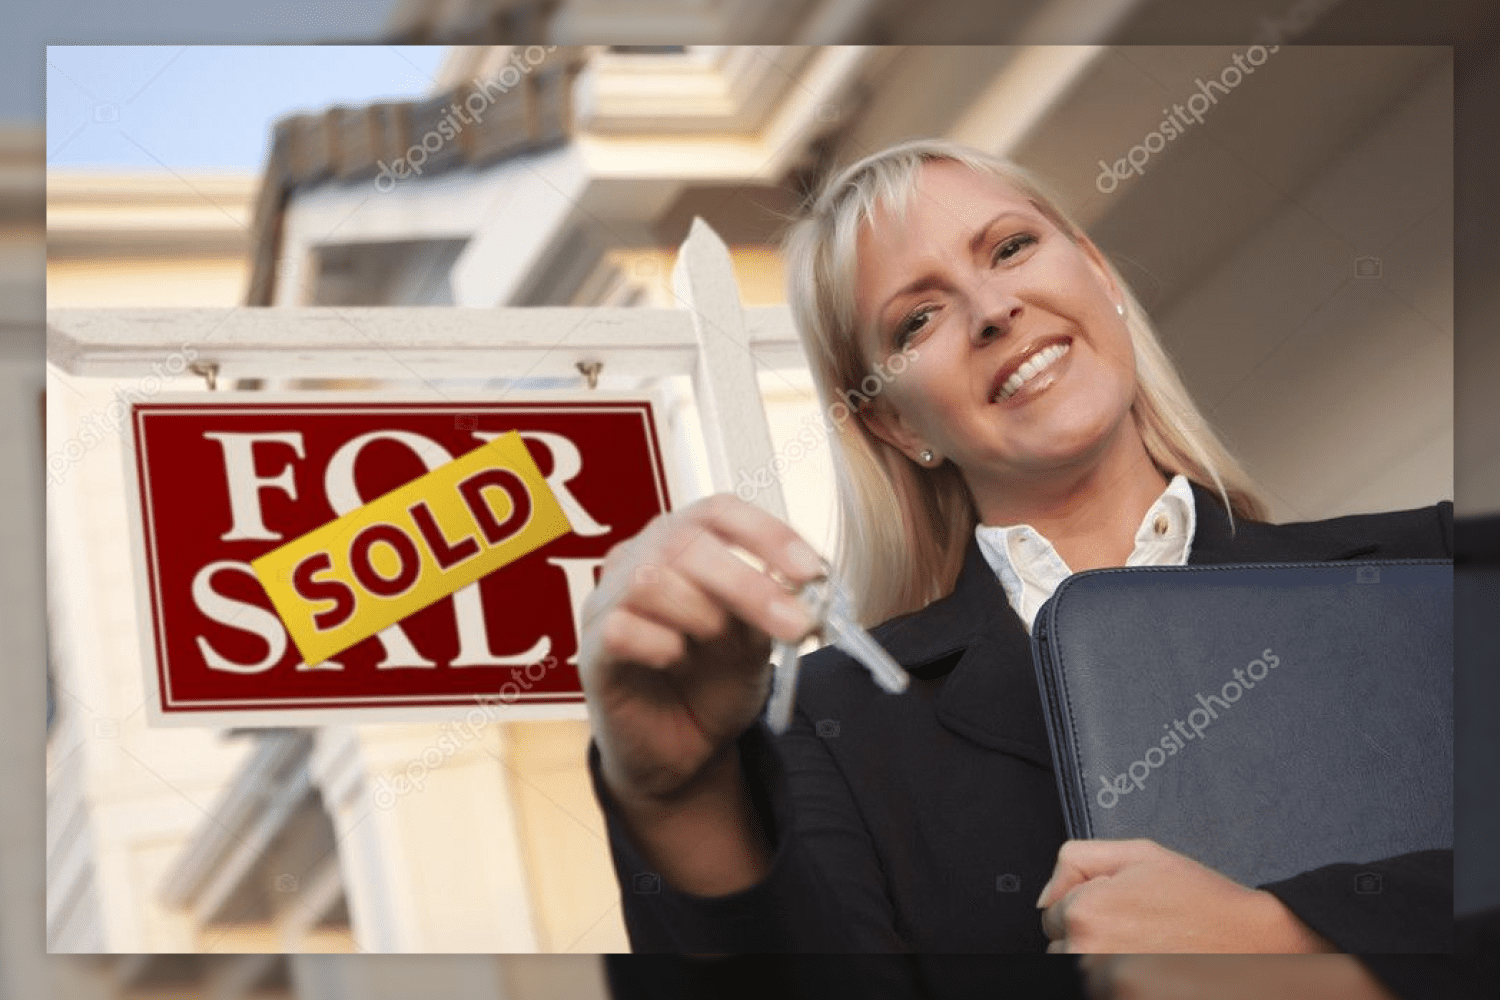 27 real estate agent with keys in front of sold sign 757